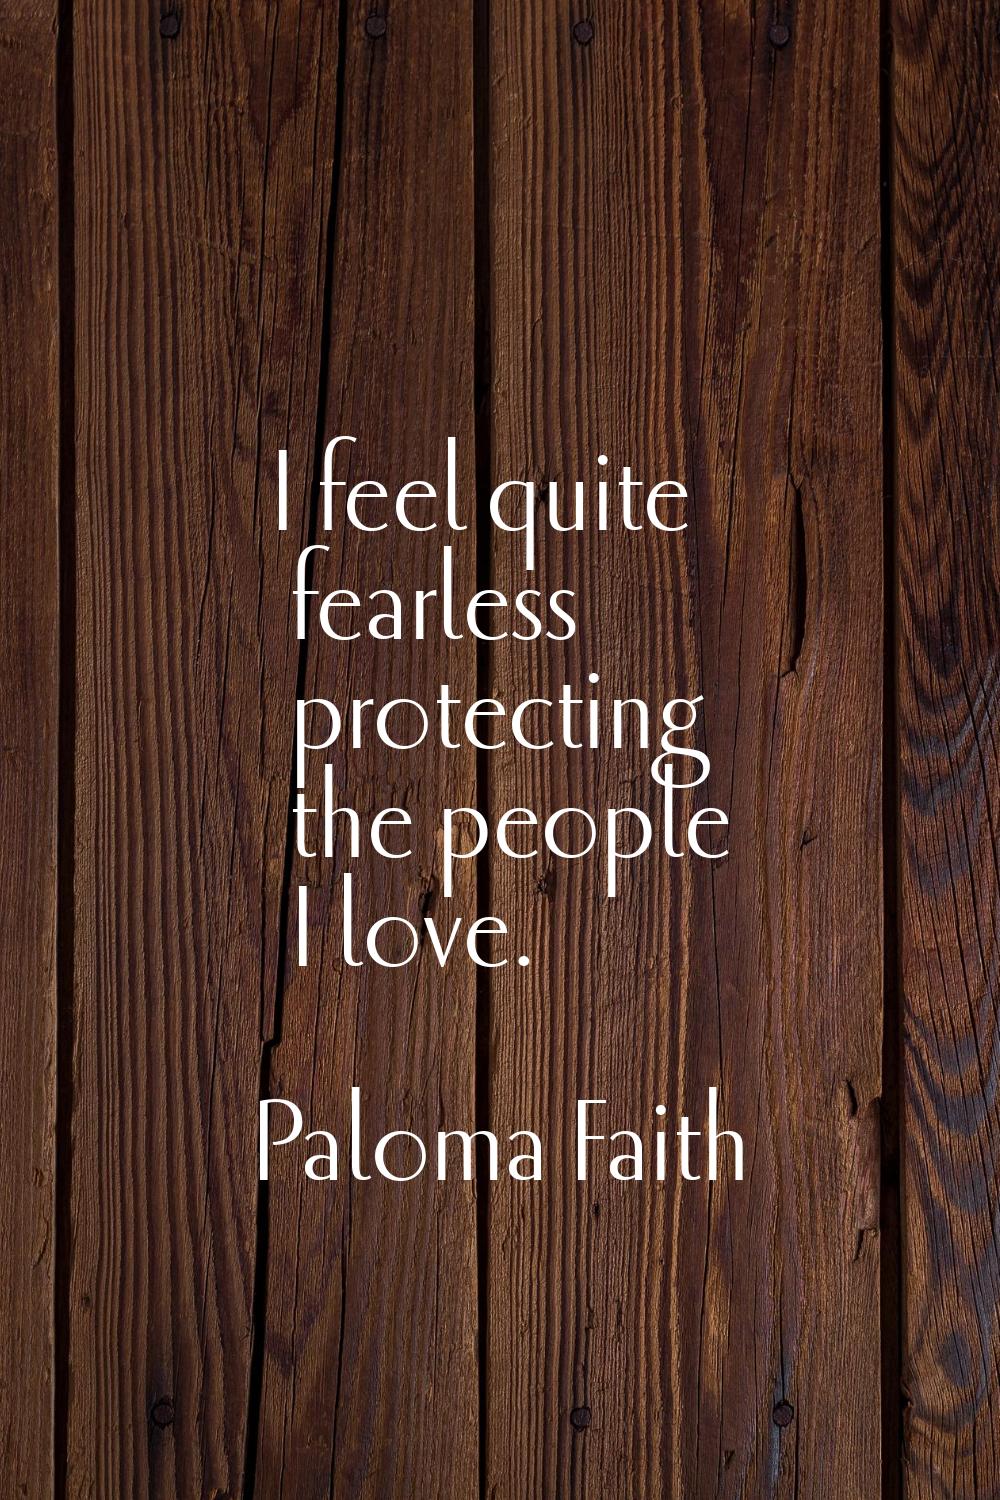 I feel quite fearless protecting the people I love.